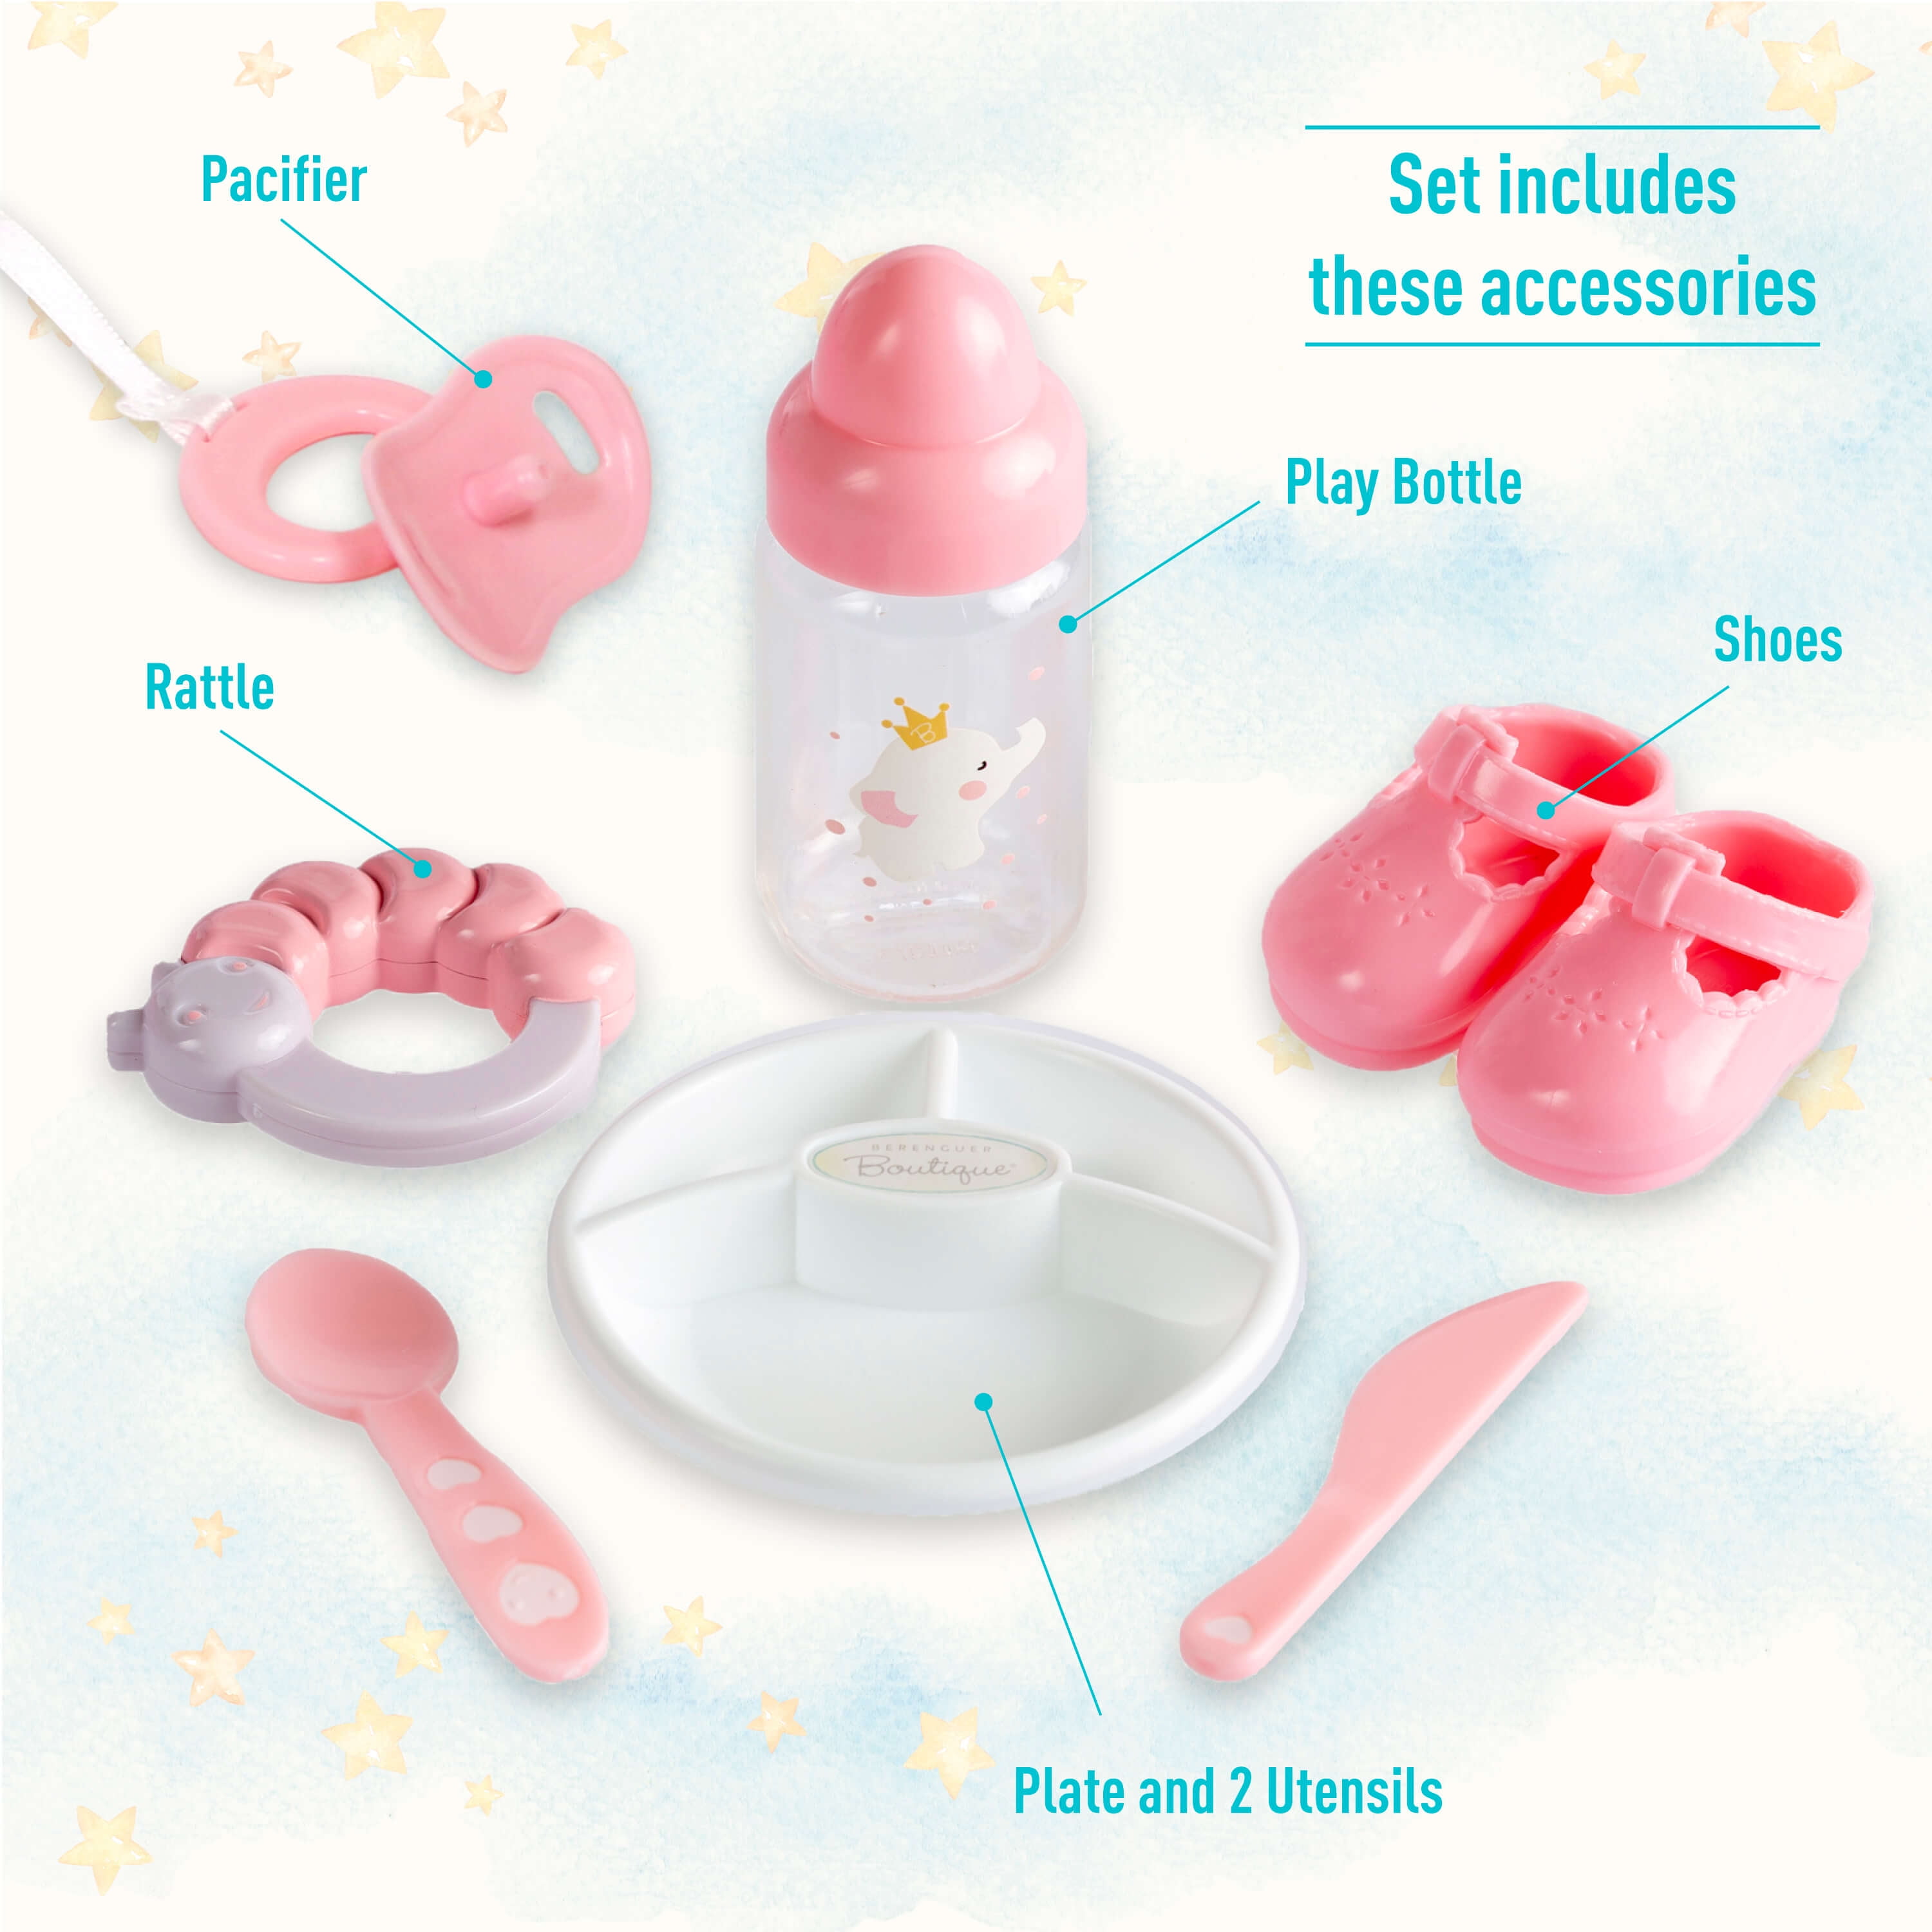  15 Realistic Soft Body Baby Doll with Open/Close Eyes, JC  Toys - Berenguer Boutique, 10 Piece Gift Set with Bottle, Rattle, Pacifier  & Accessories, Pink